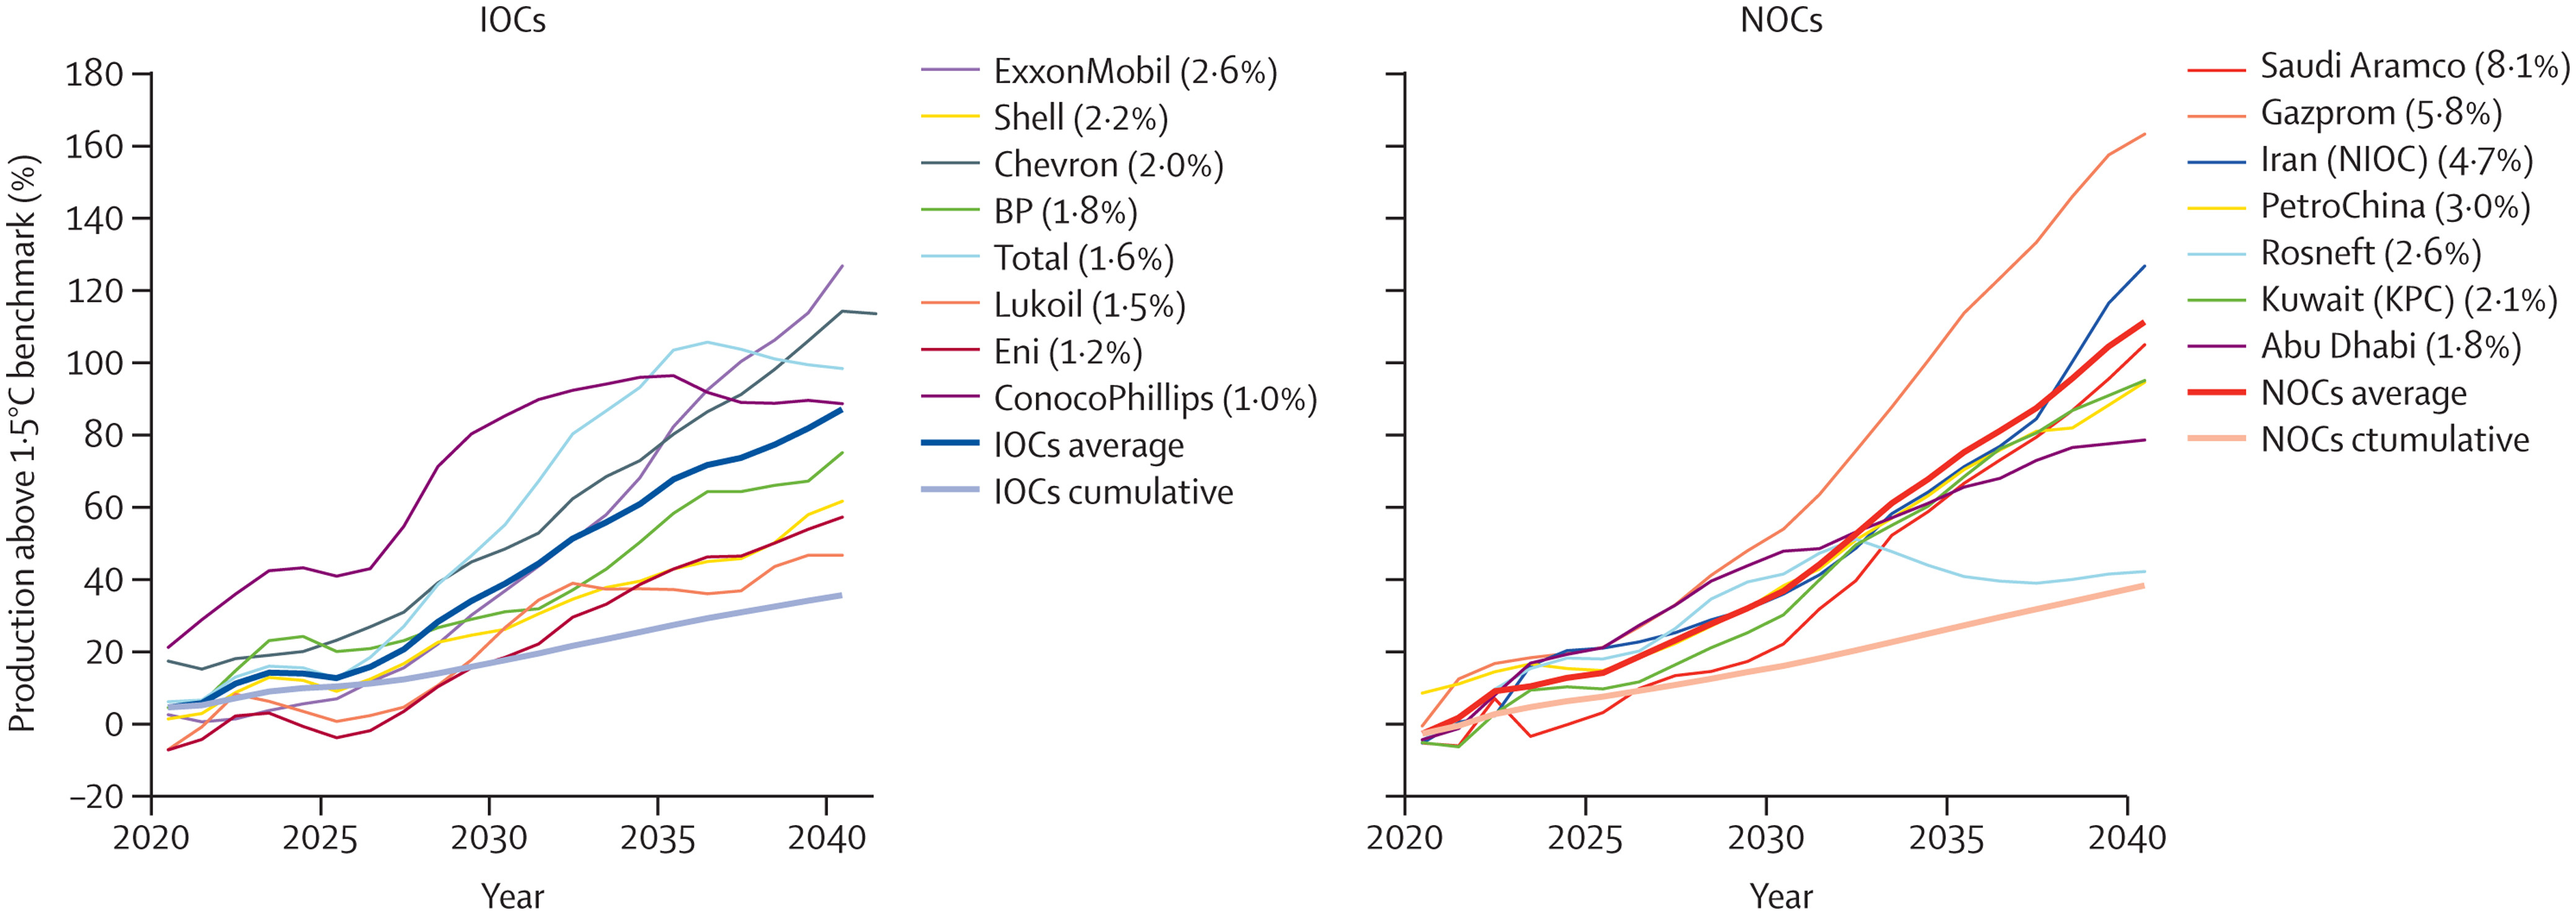 Compatibility of large oil and gas company production strategies with the Paris Agreement climate target of 1.5°C. Percentages in brackets in the legend represent the average 2015-2019 global market share for each company. IOCs=international oil and gas companies. NOCs=national oil and gas companies. Data in this indicator suggest that the production strategies of these companies would generate greenhouse gas emissions that exceed their share compatible with 1.5°C by an average of 39% for these IOCs, and 37% for the NOCs, in 2030. These excess emissions would rise to 87% for IOCs and 111% for NOCs in 2040 (figure 16). Cumulative production from 2020 to 2040 is projected to exceed their share of the 1.5°C target by 36% for IOCs and 38% for NOCs. Graphic: Romanello, et al., 2022 / The Lancet